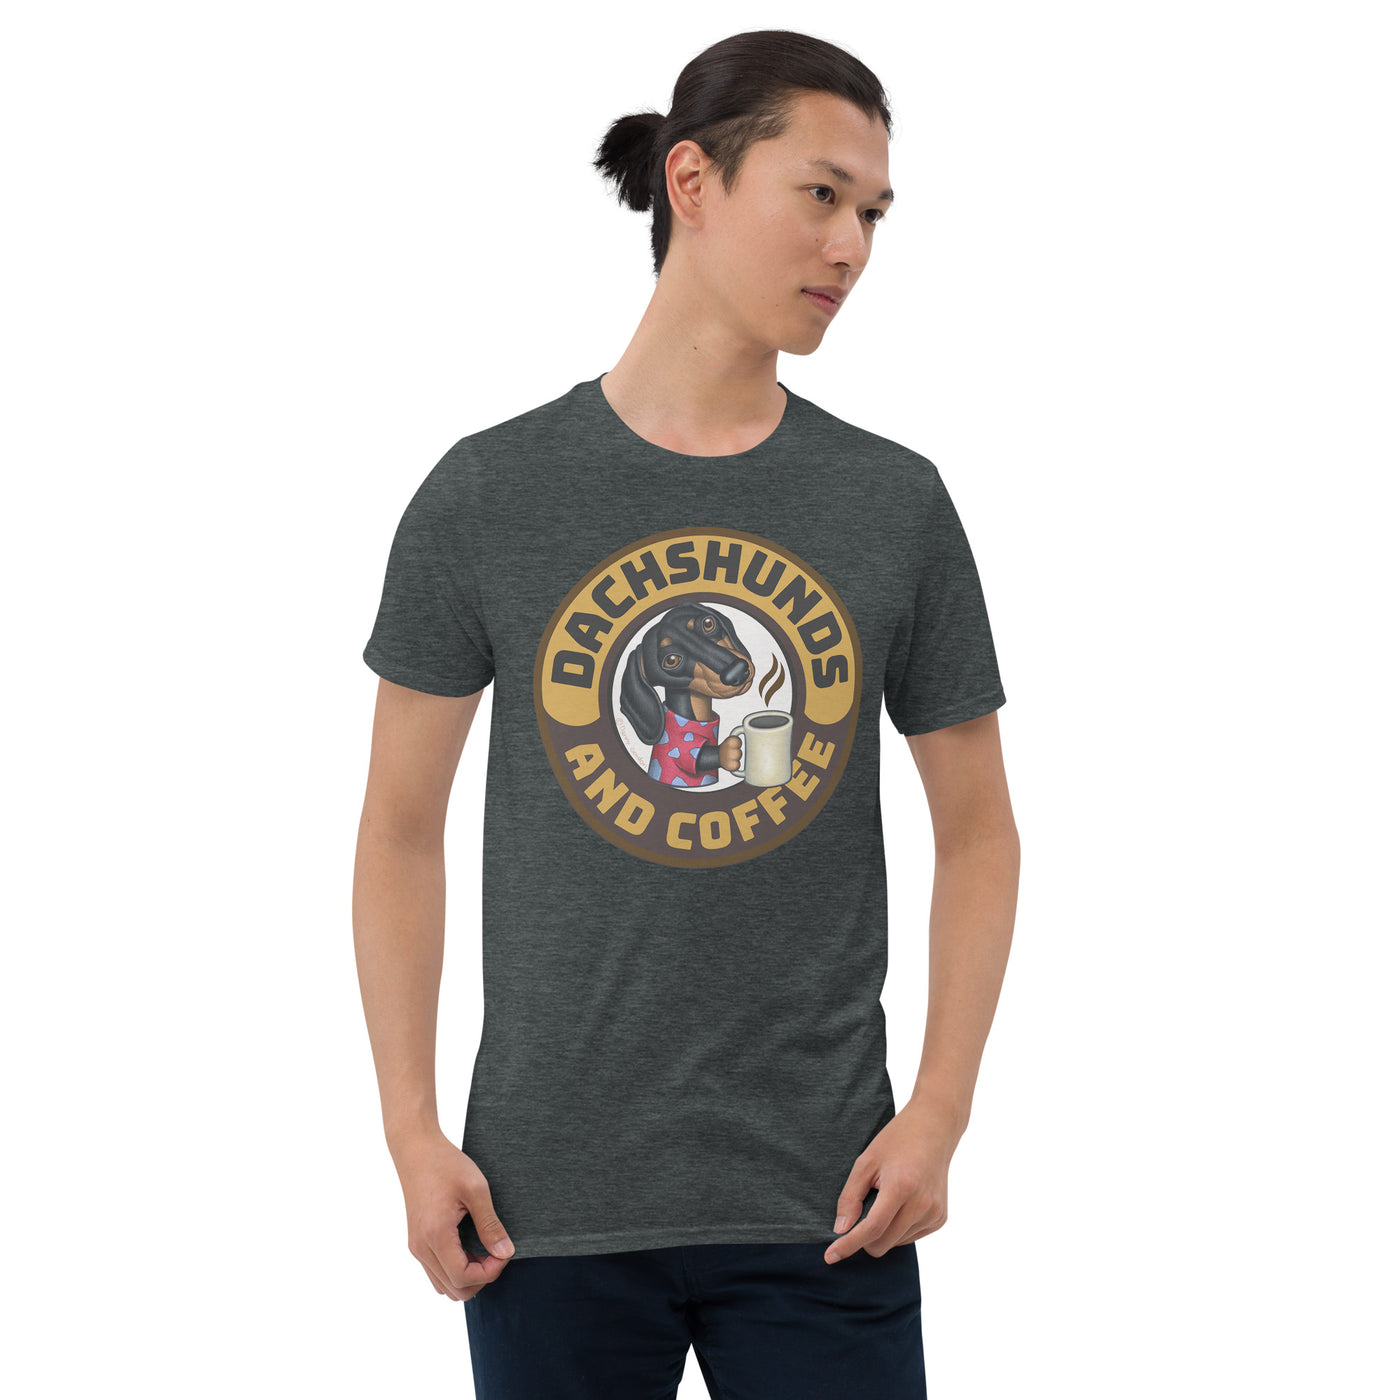 Cute Doxie Dog on Dachshunds and Coffee Unisex T-Shirt tee